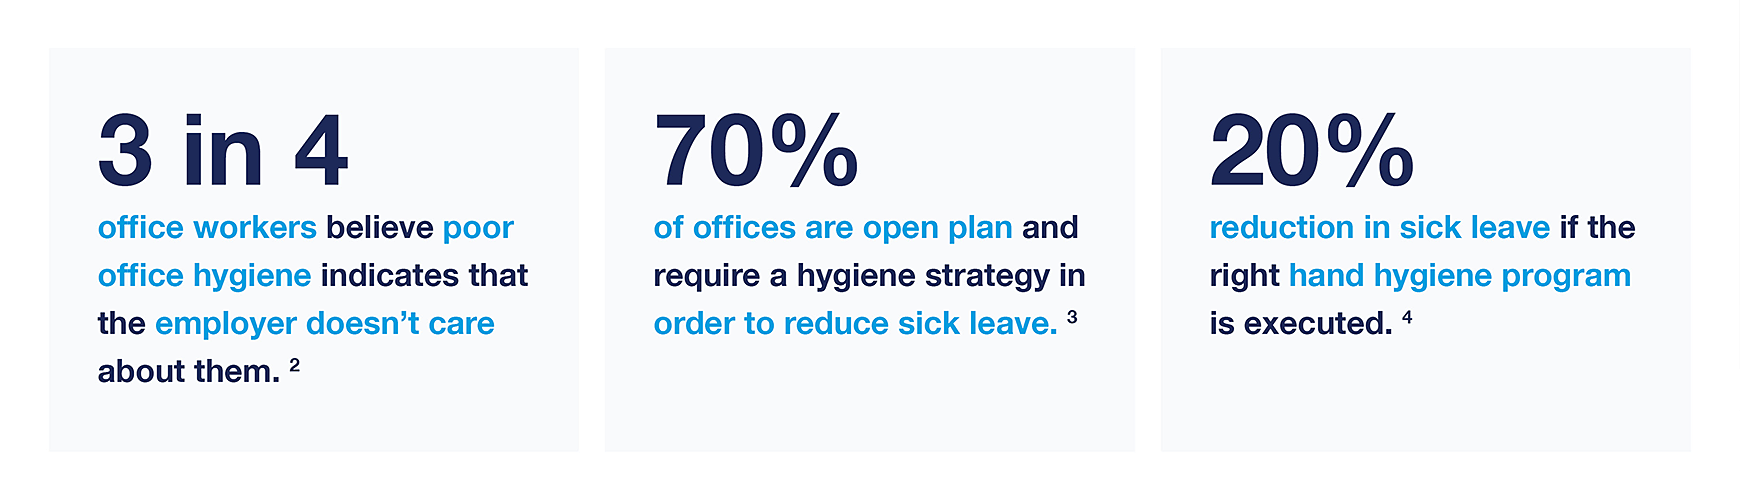 3 in 4 office workers believe poor office hygiene indicates that the employer doesn’t care about them